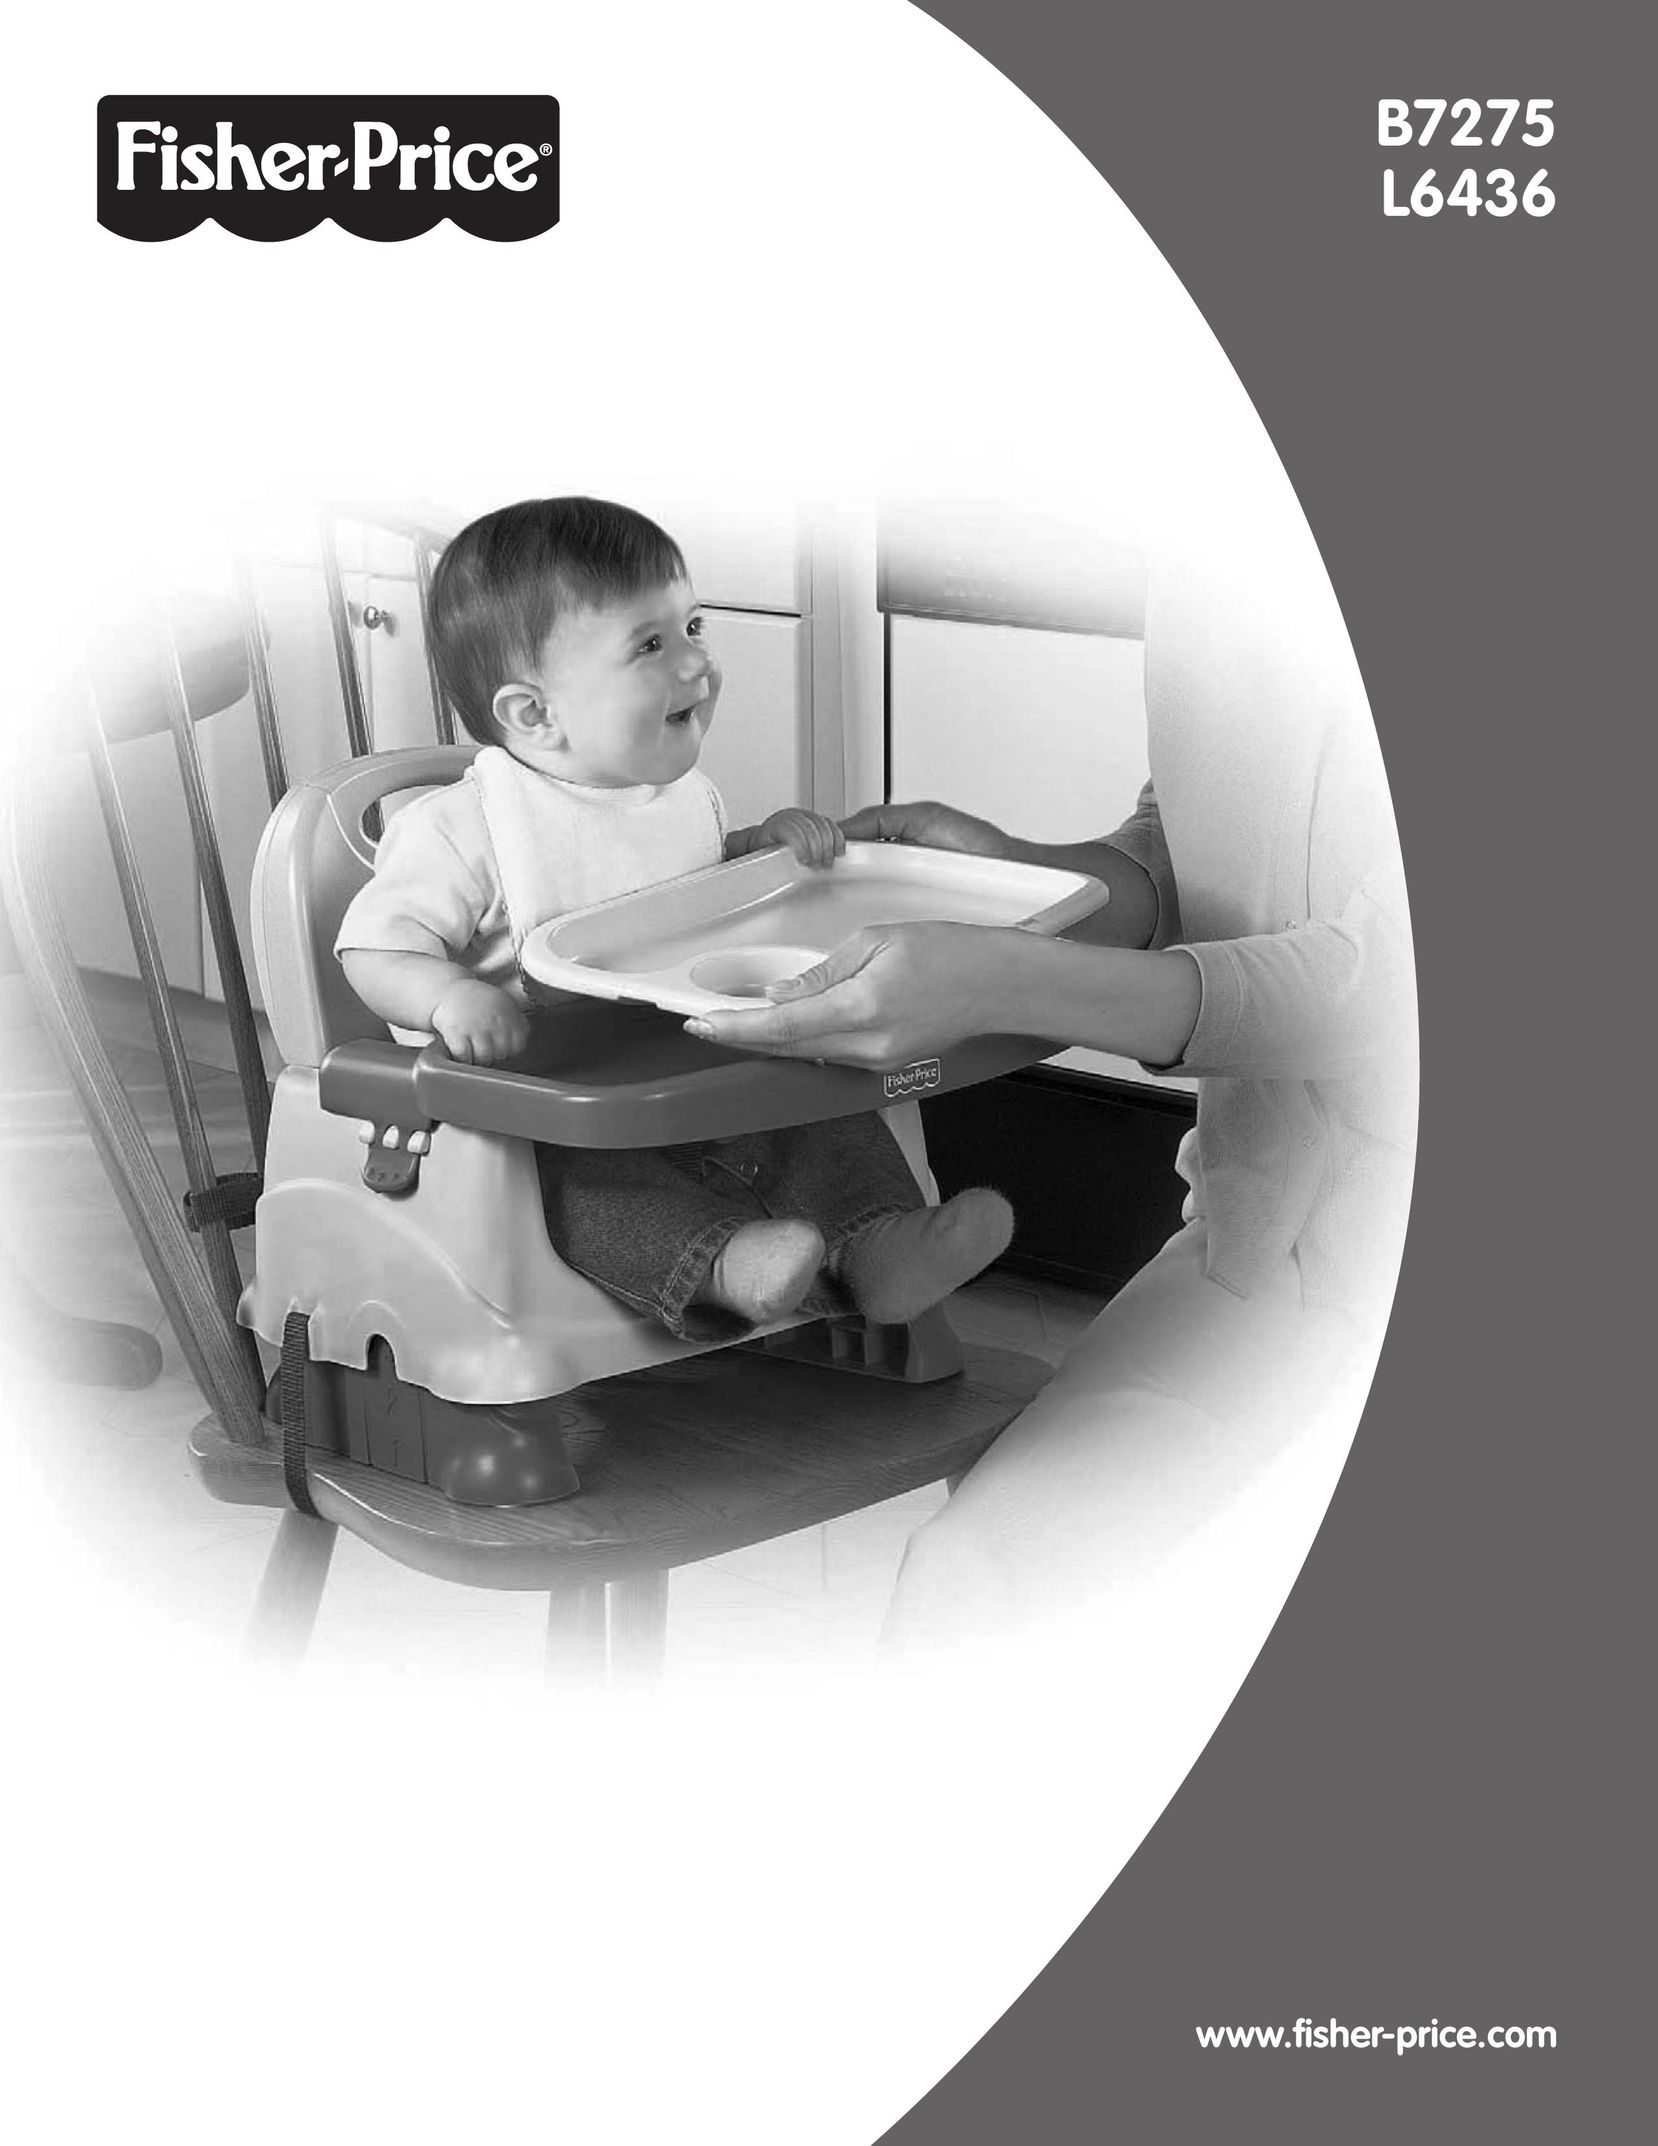 Fisher-Price L6436 High Chair User Manual